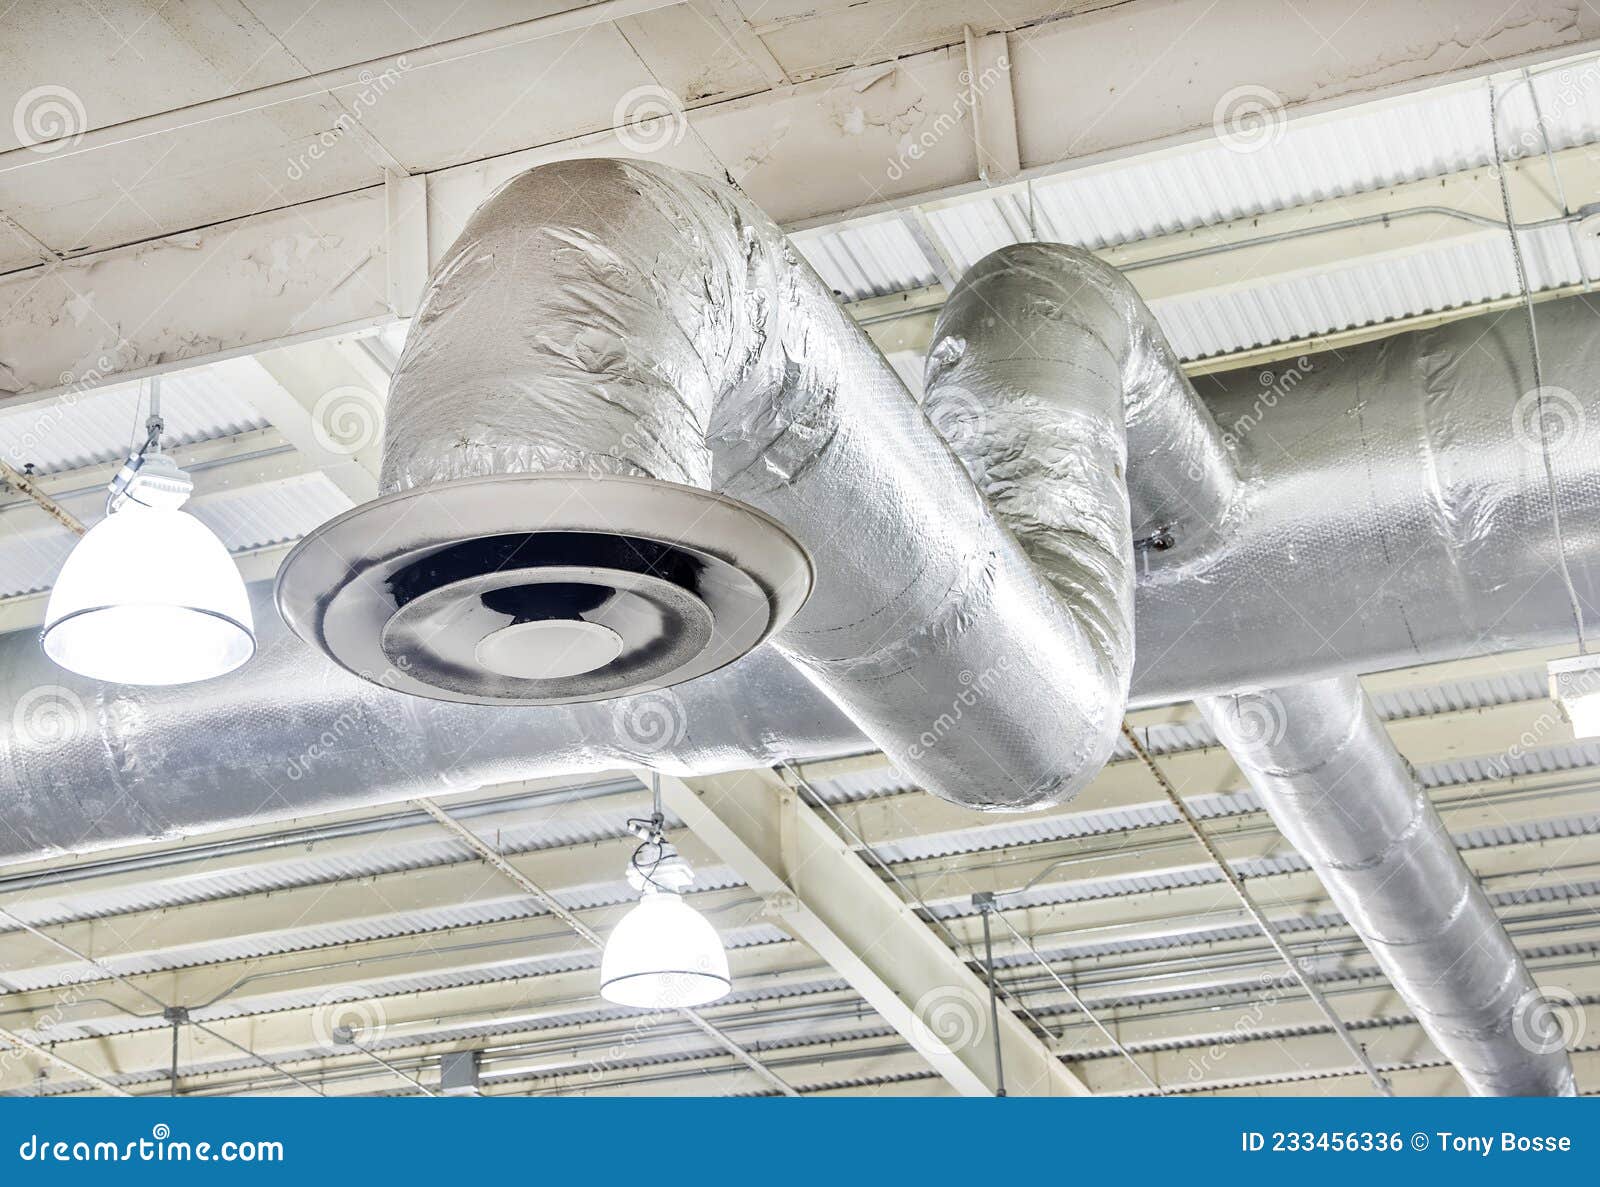 factory air conditioning vent and ducts